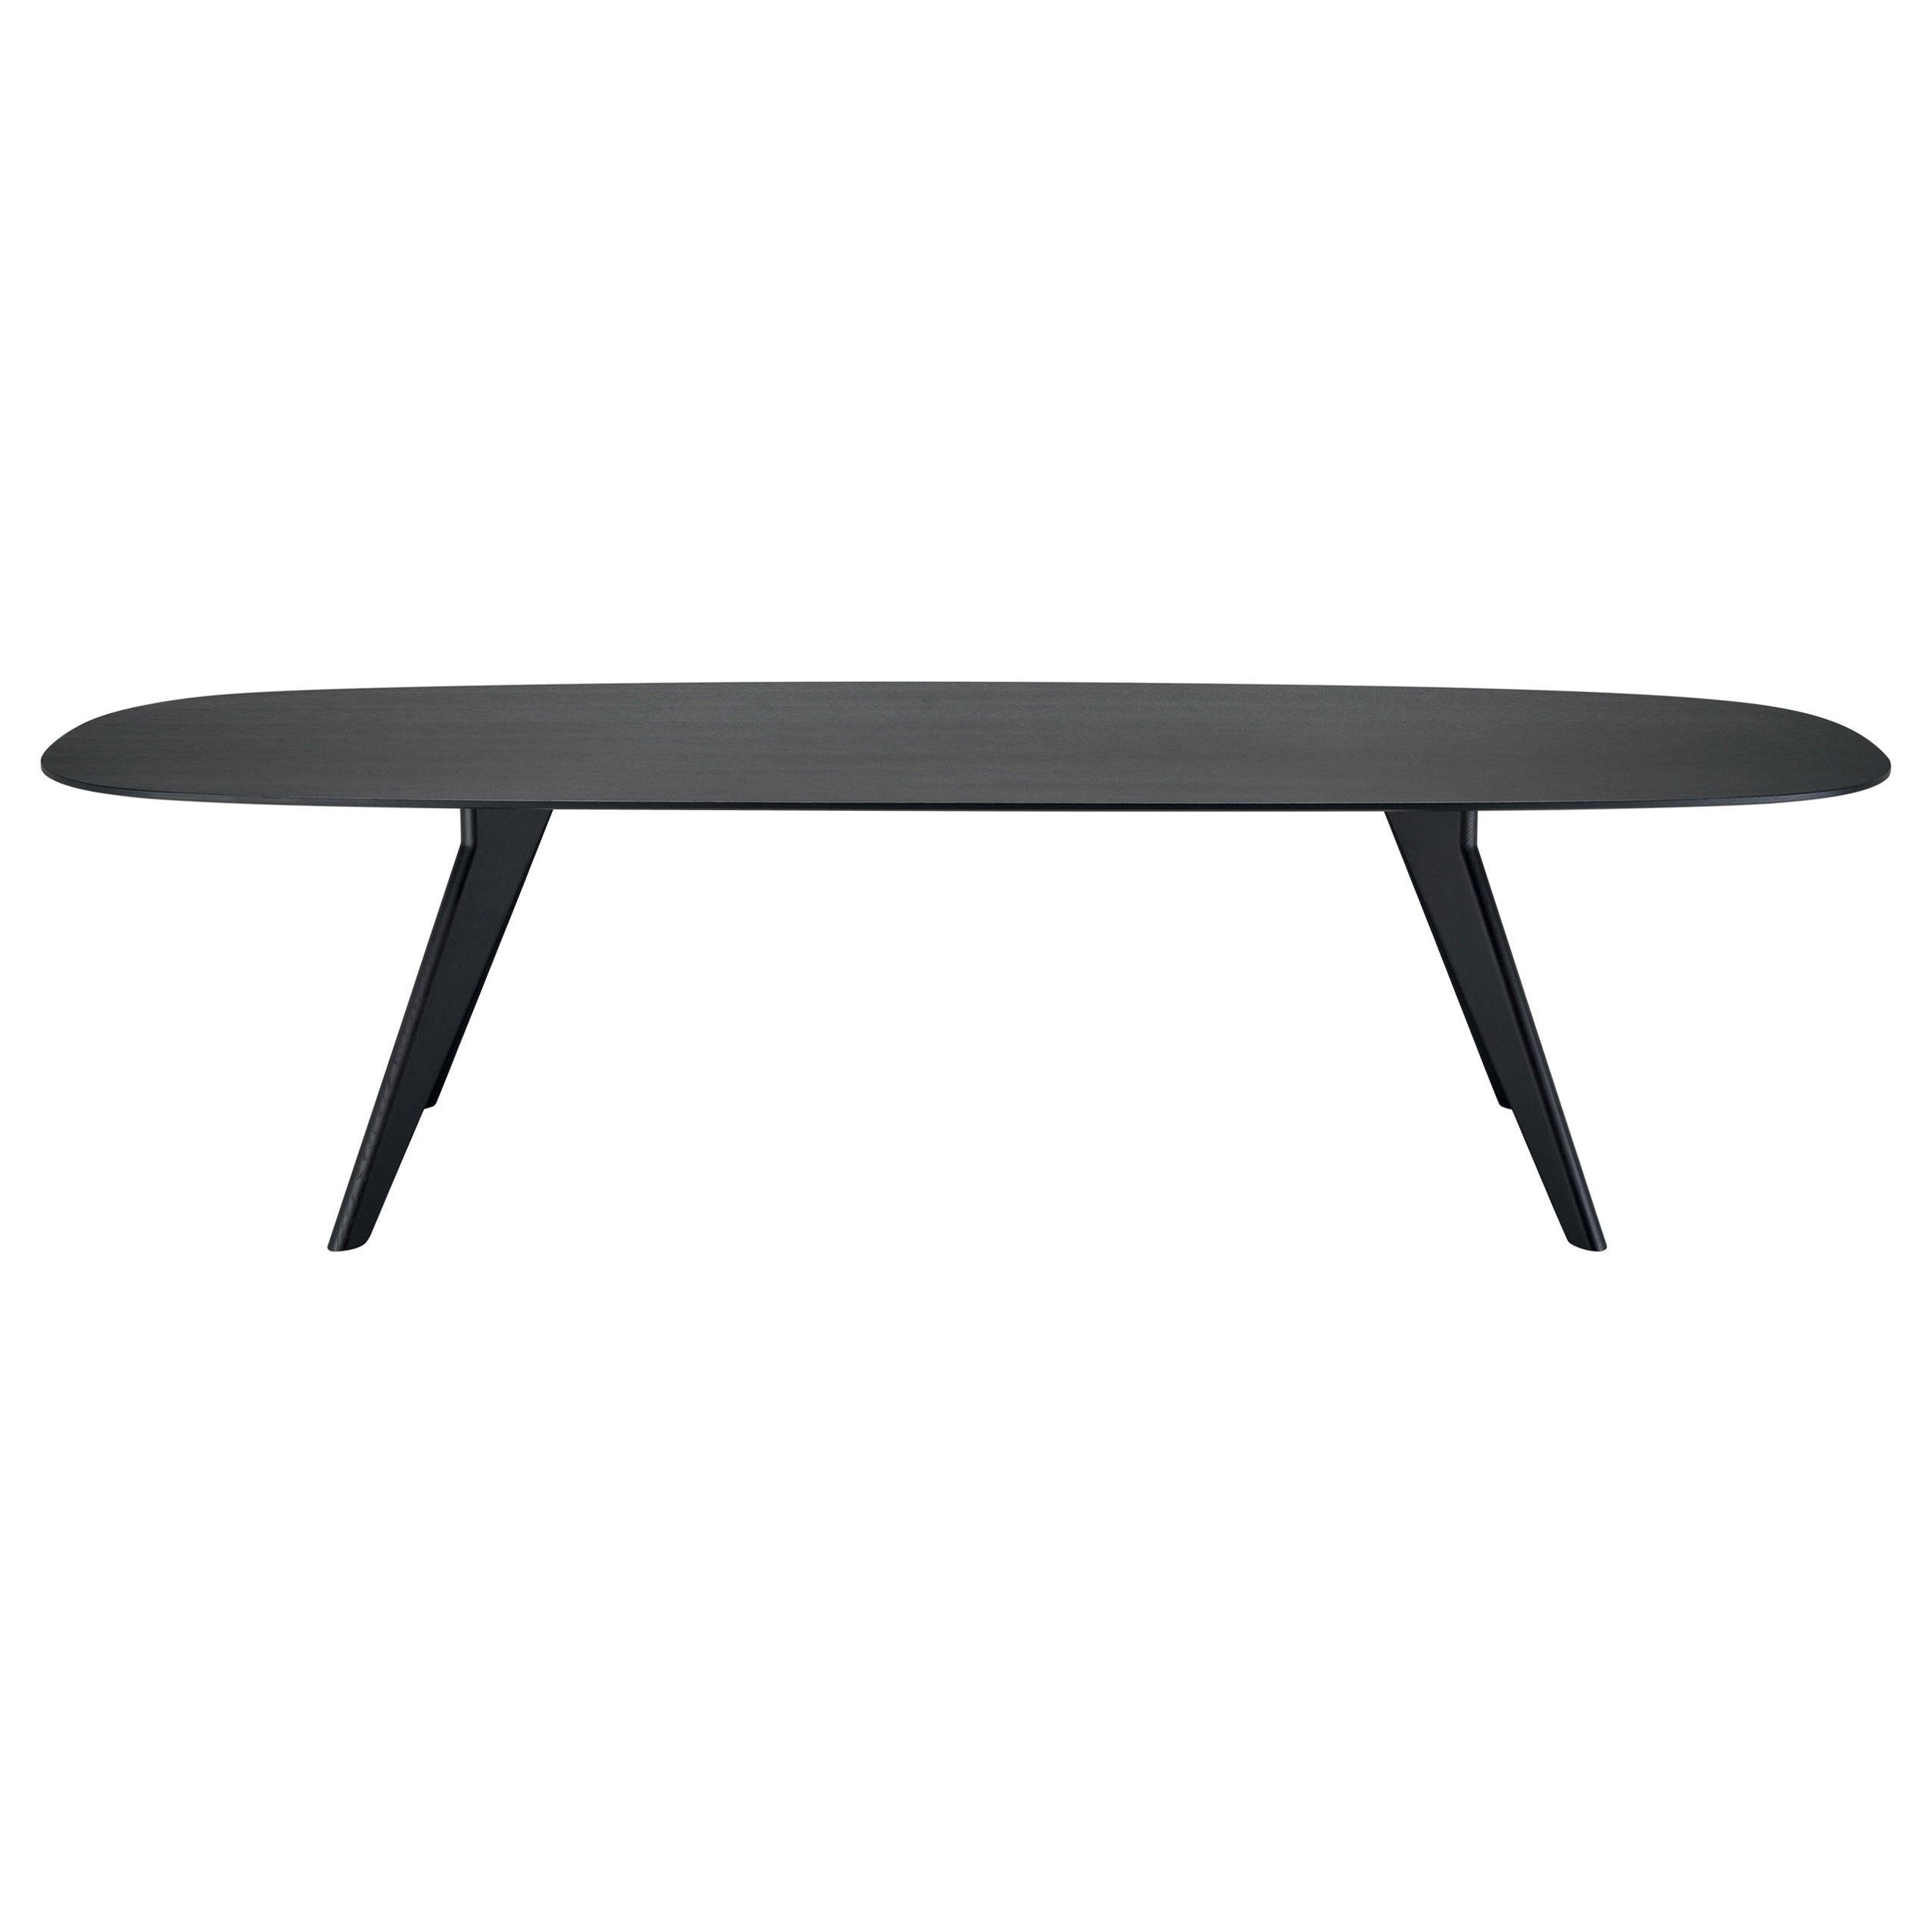 Alias AGO AG9 Oval Table with Dark Oak and Metal Frame in Lacquered Steel 